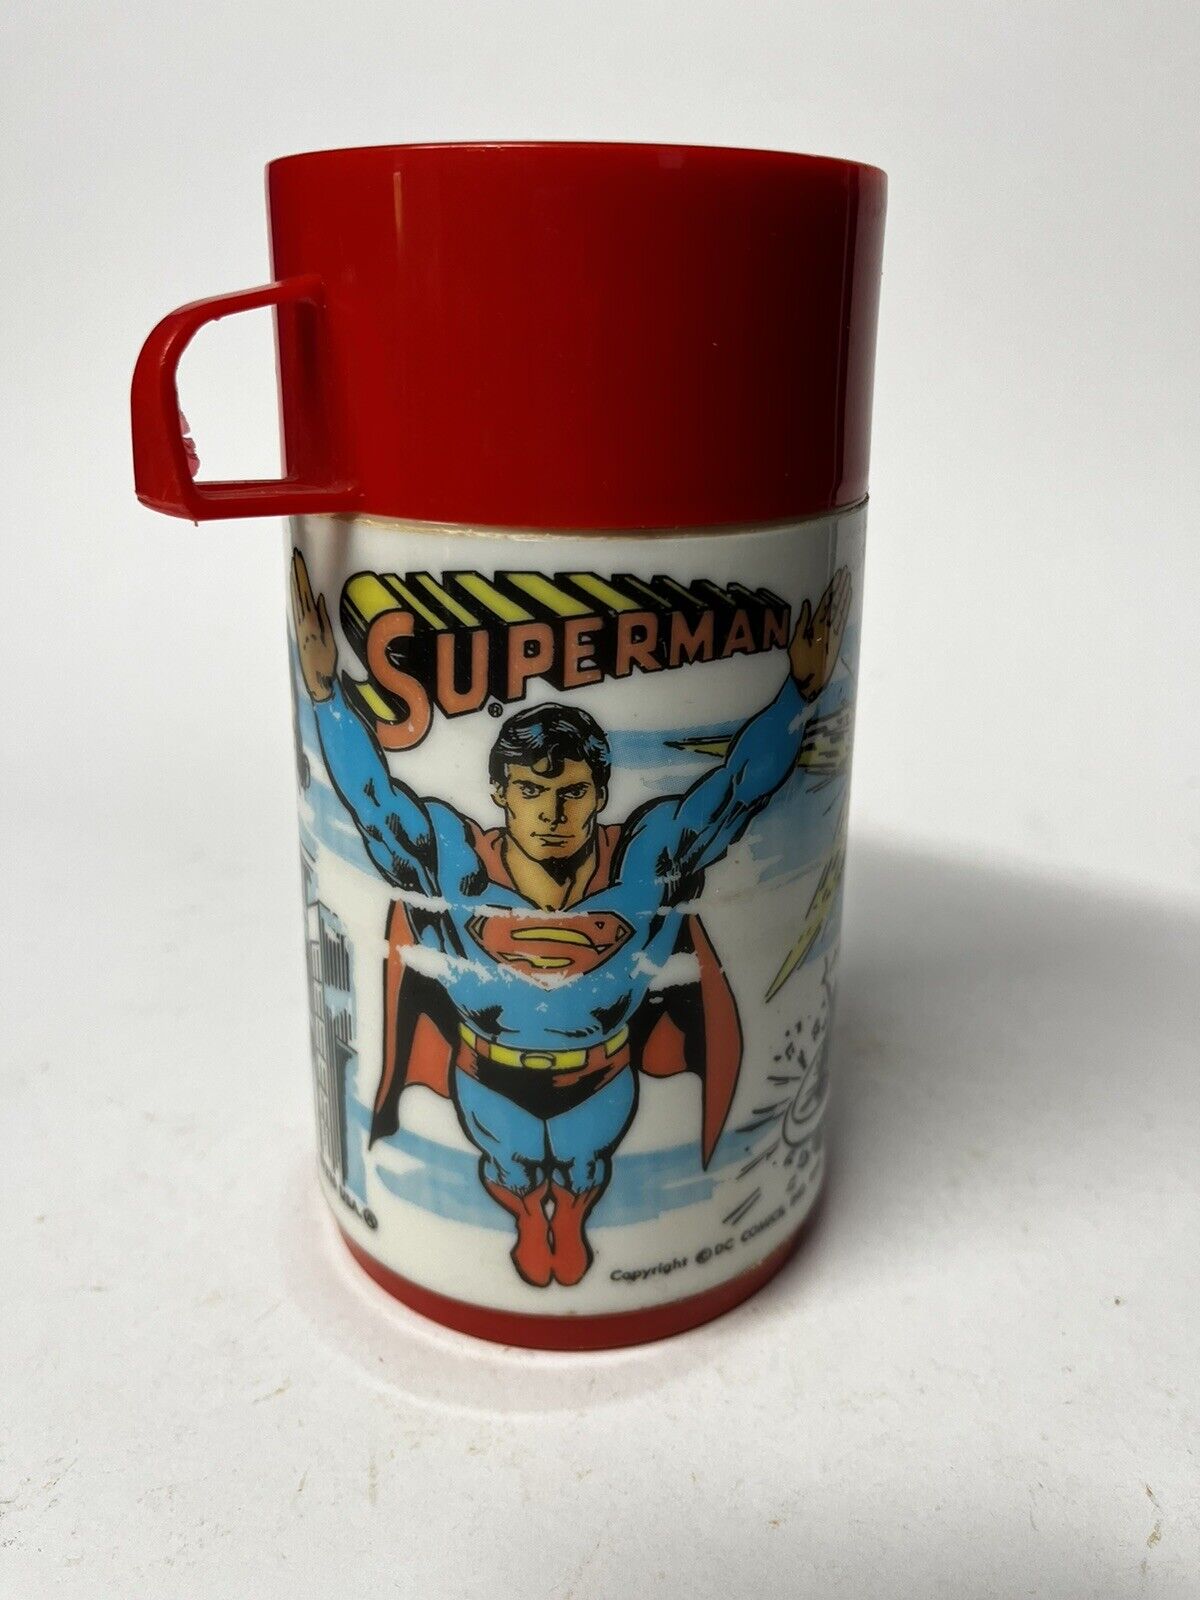 Vintage 1978 DC Comics Superman Thermos Aladdin with Red Lid